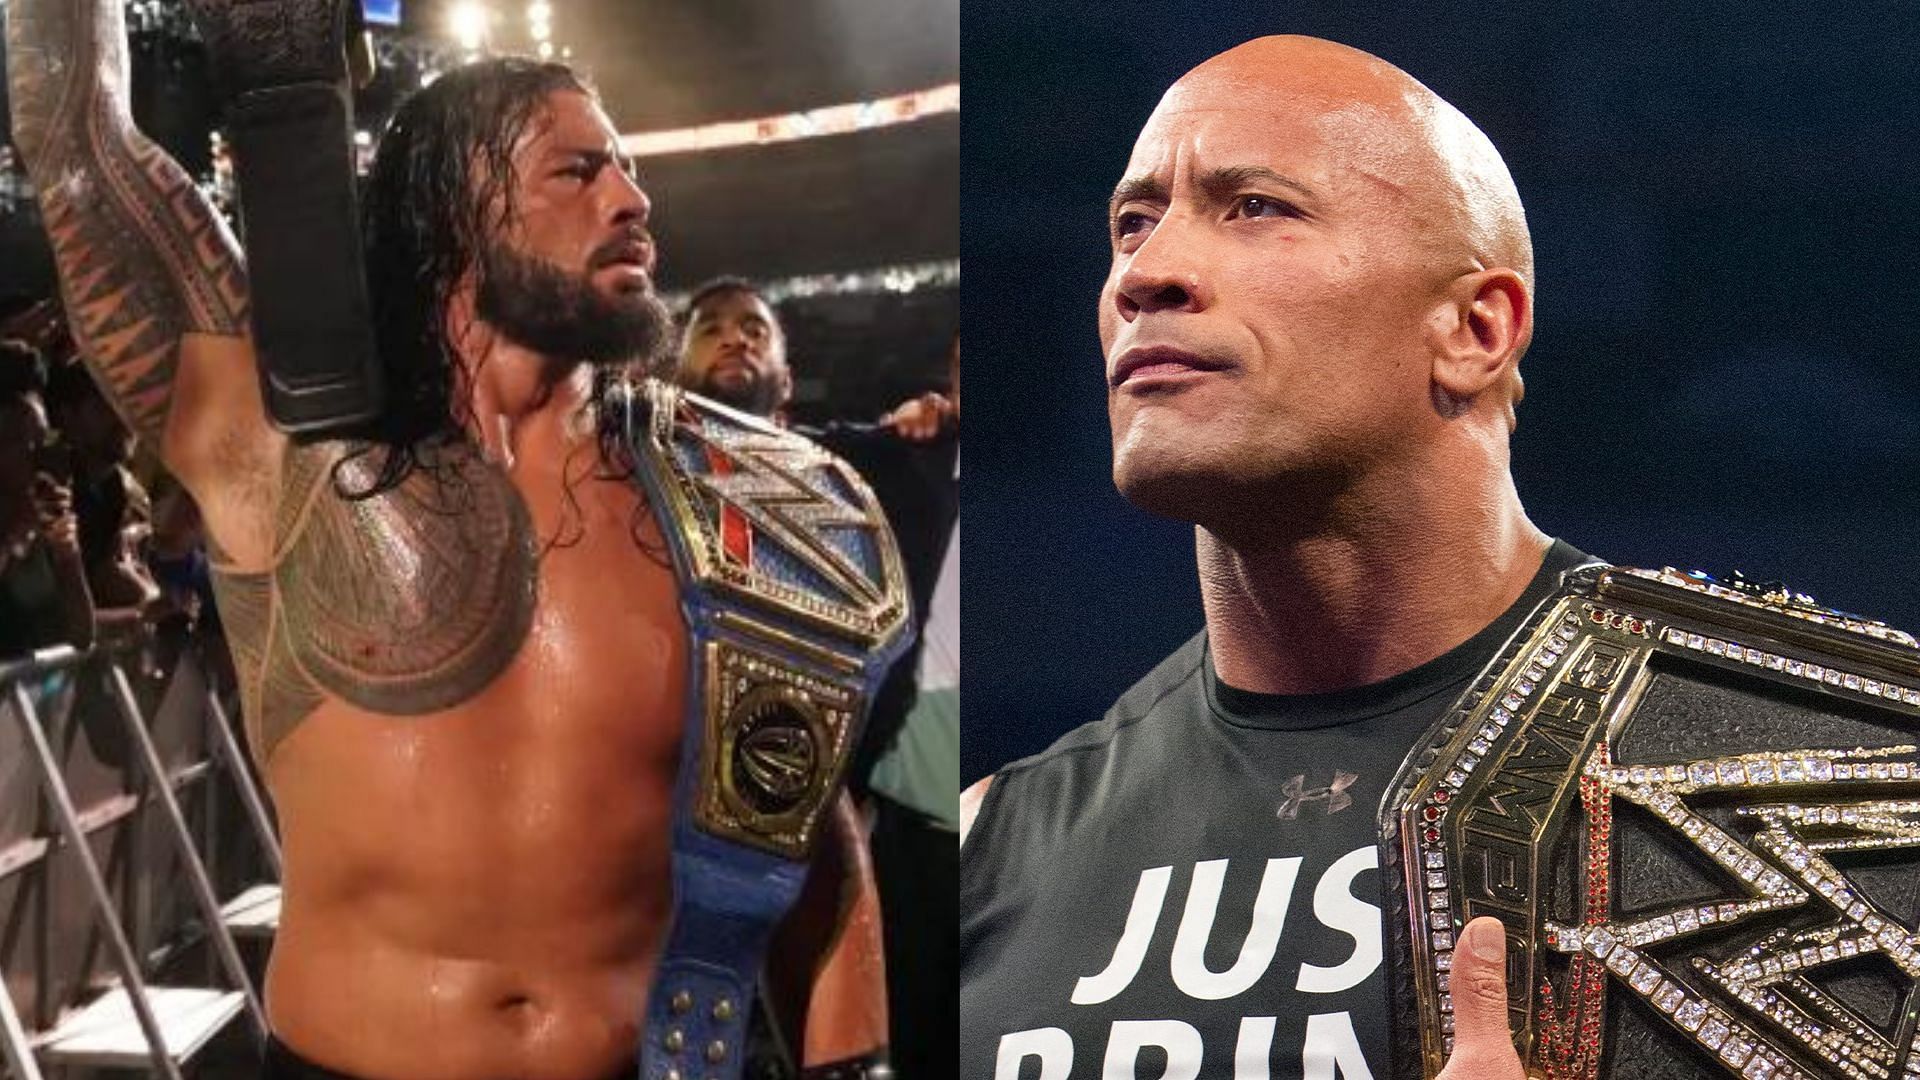 Should Roman Reigns defend his world titles against The Rock?